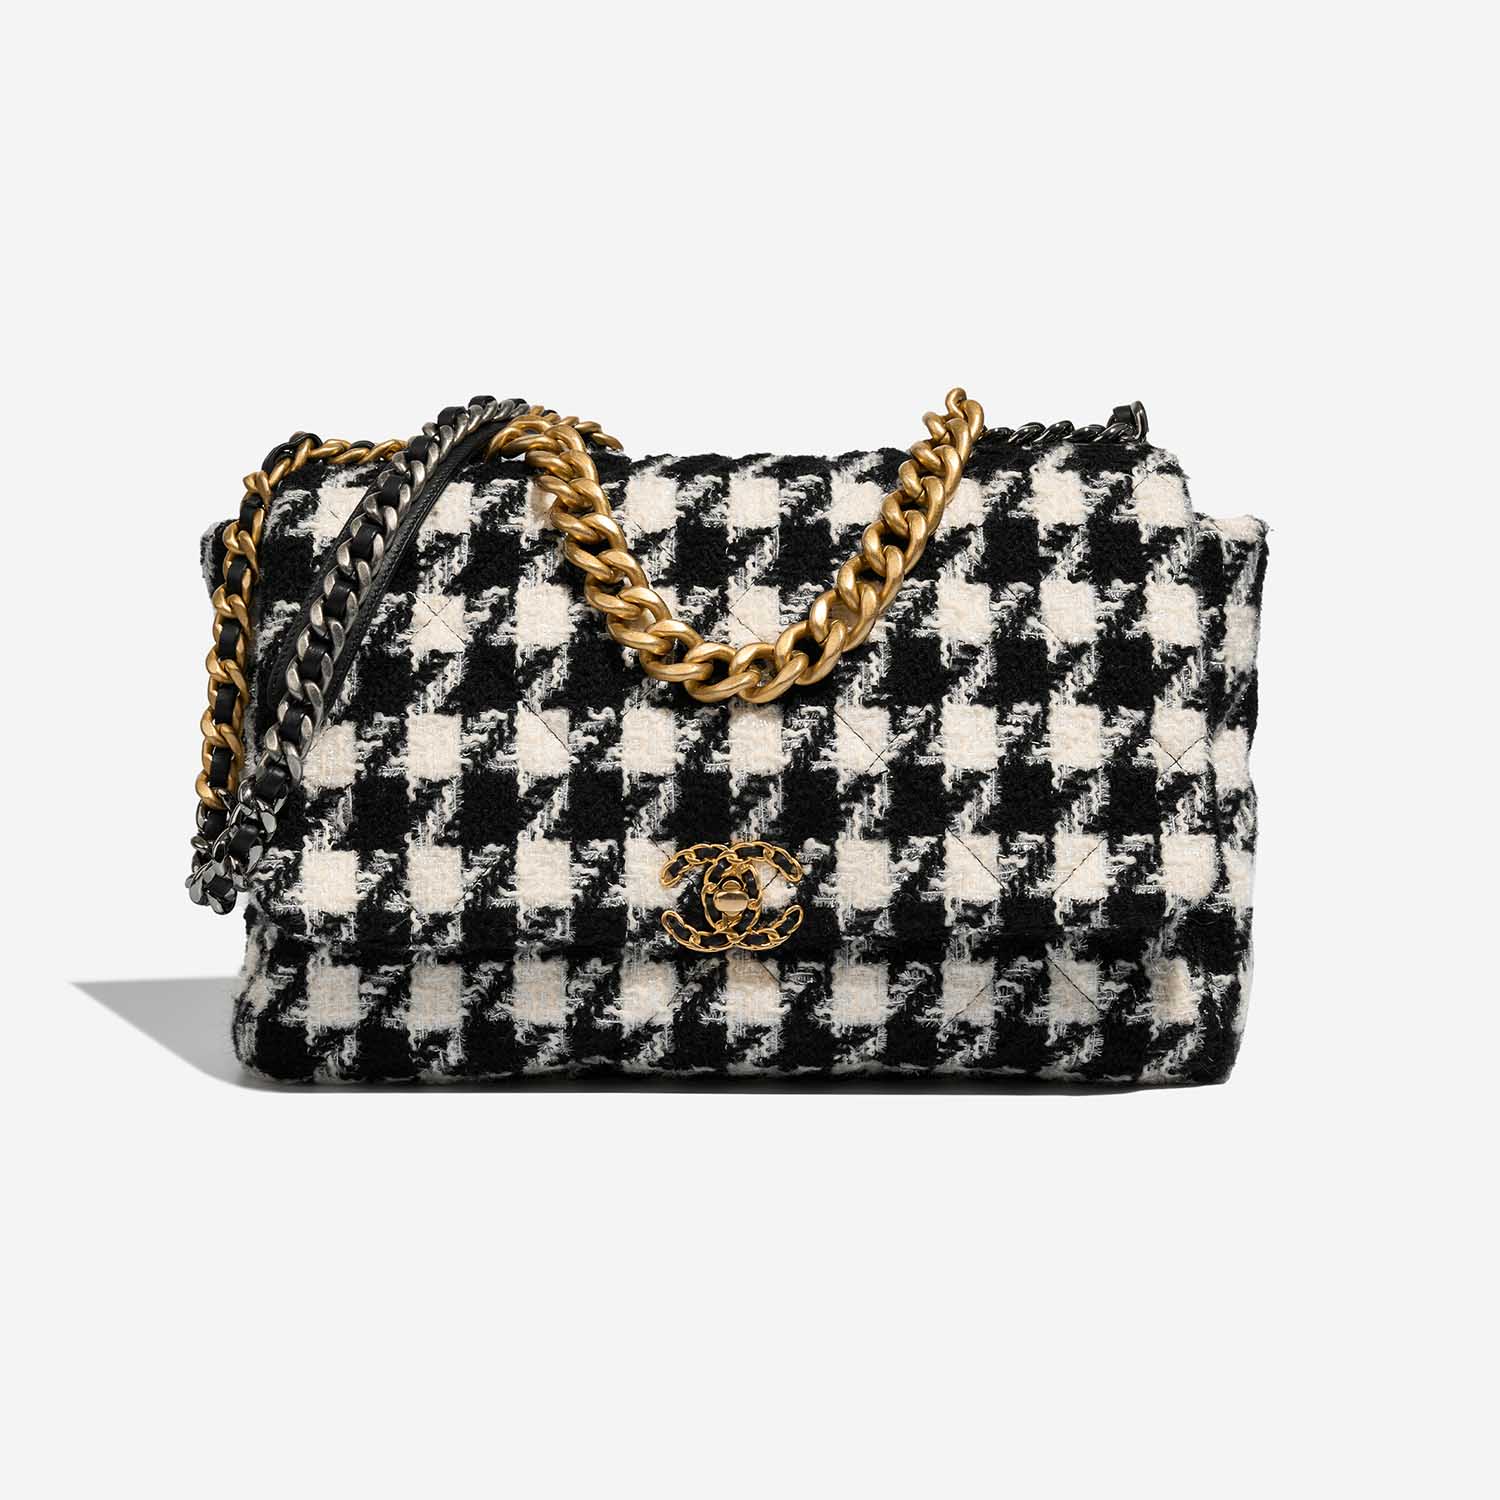 Pre-owned Chanel bag 19 Flap Bag Maxi Tweed Black / White Black, Multicolour, White | Sell your designer bag on Saclab.com